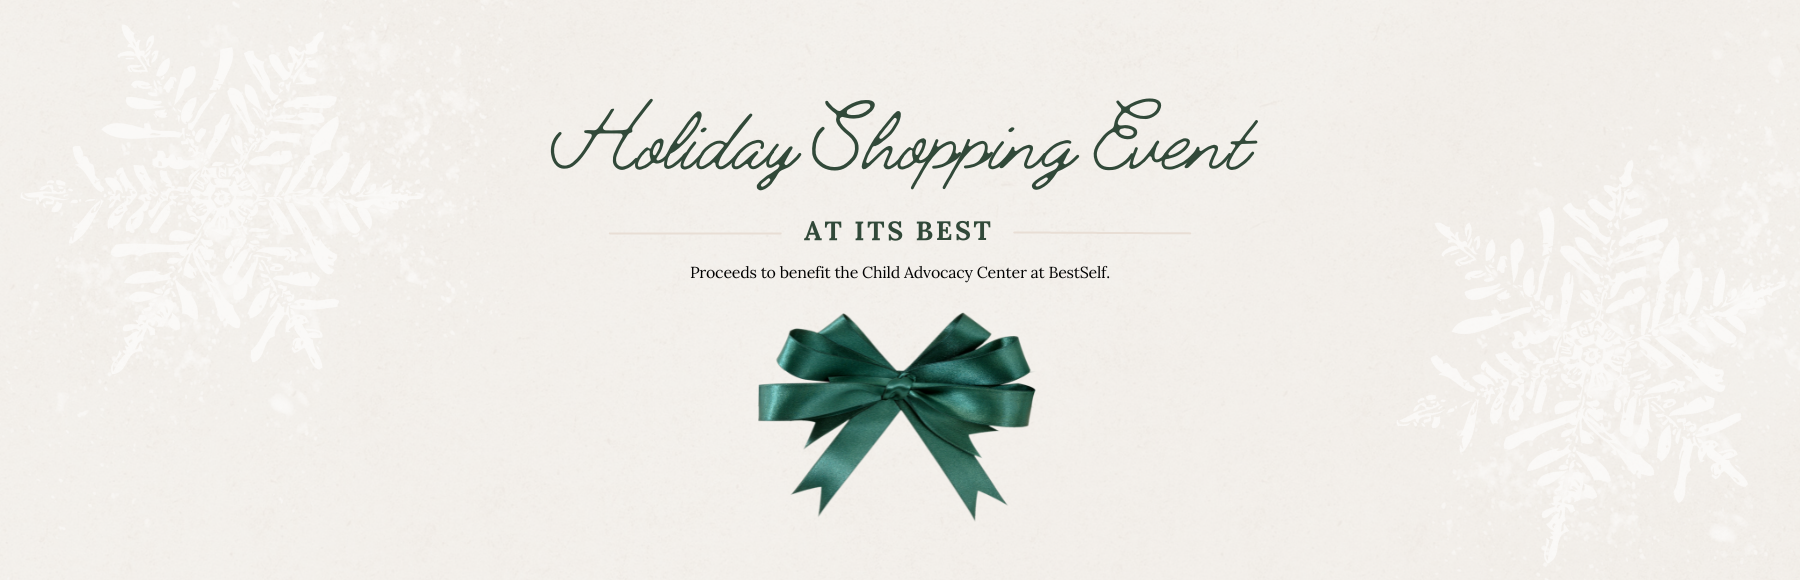 Holiday Shopping Event